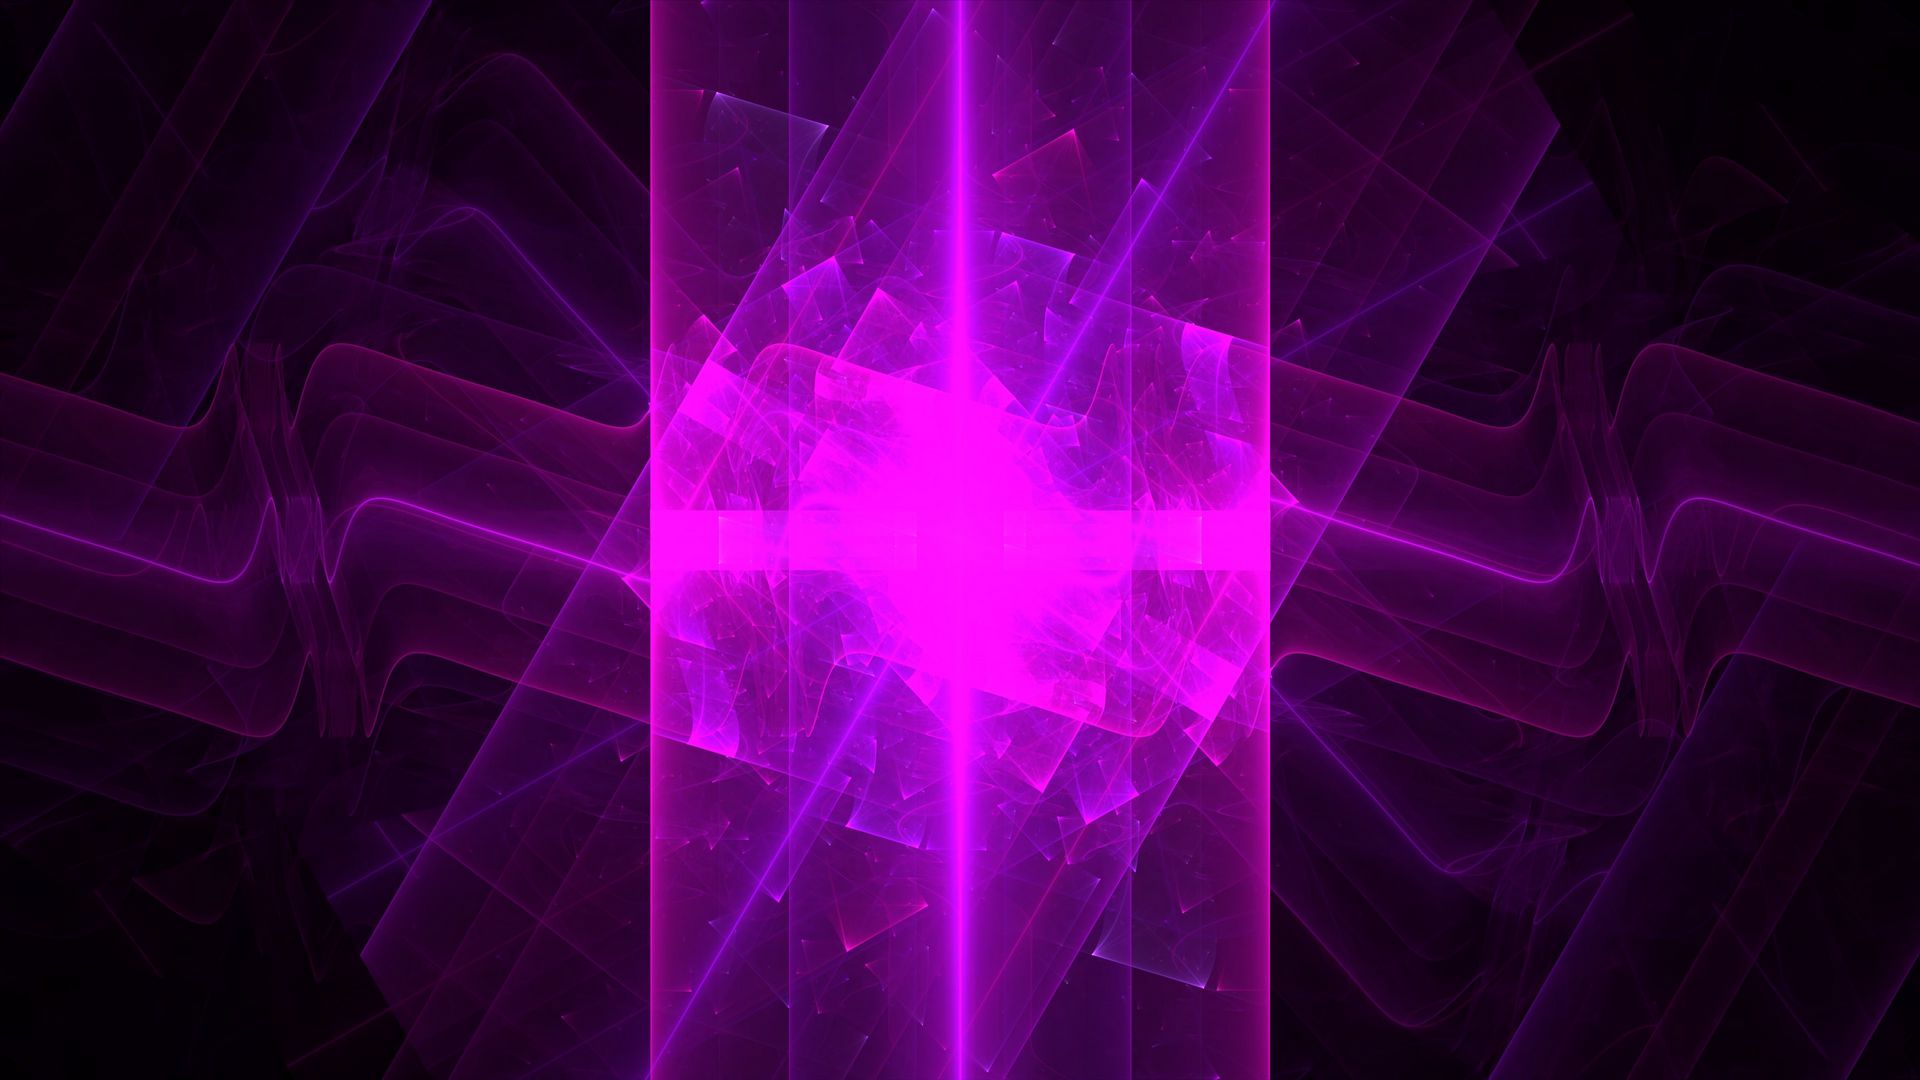 Download wallpaper 1920x1080 rays, lines, glow, shapes, purple ...